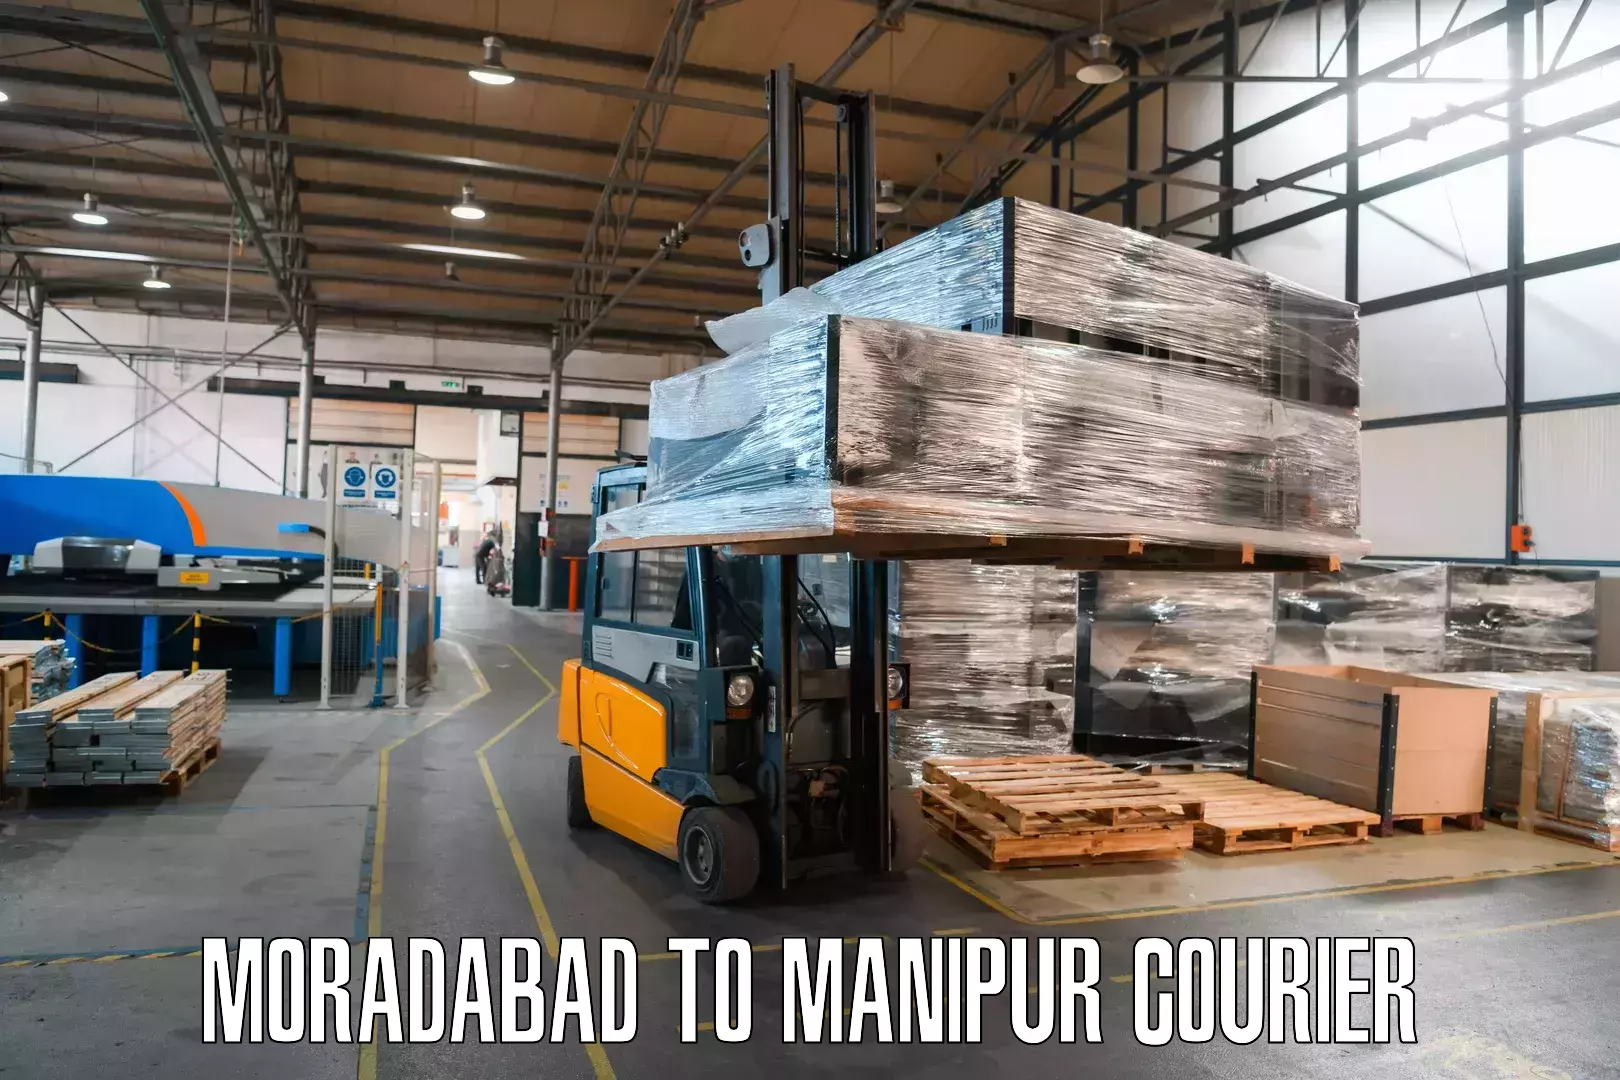 24/7 courier service Moradabad to Chandel